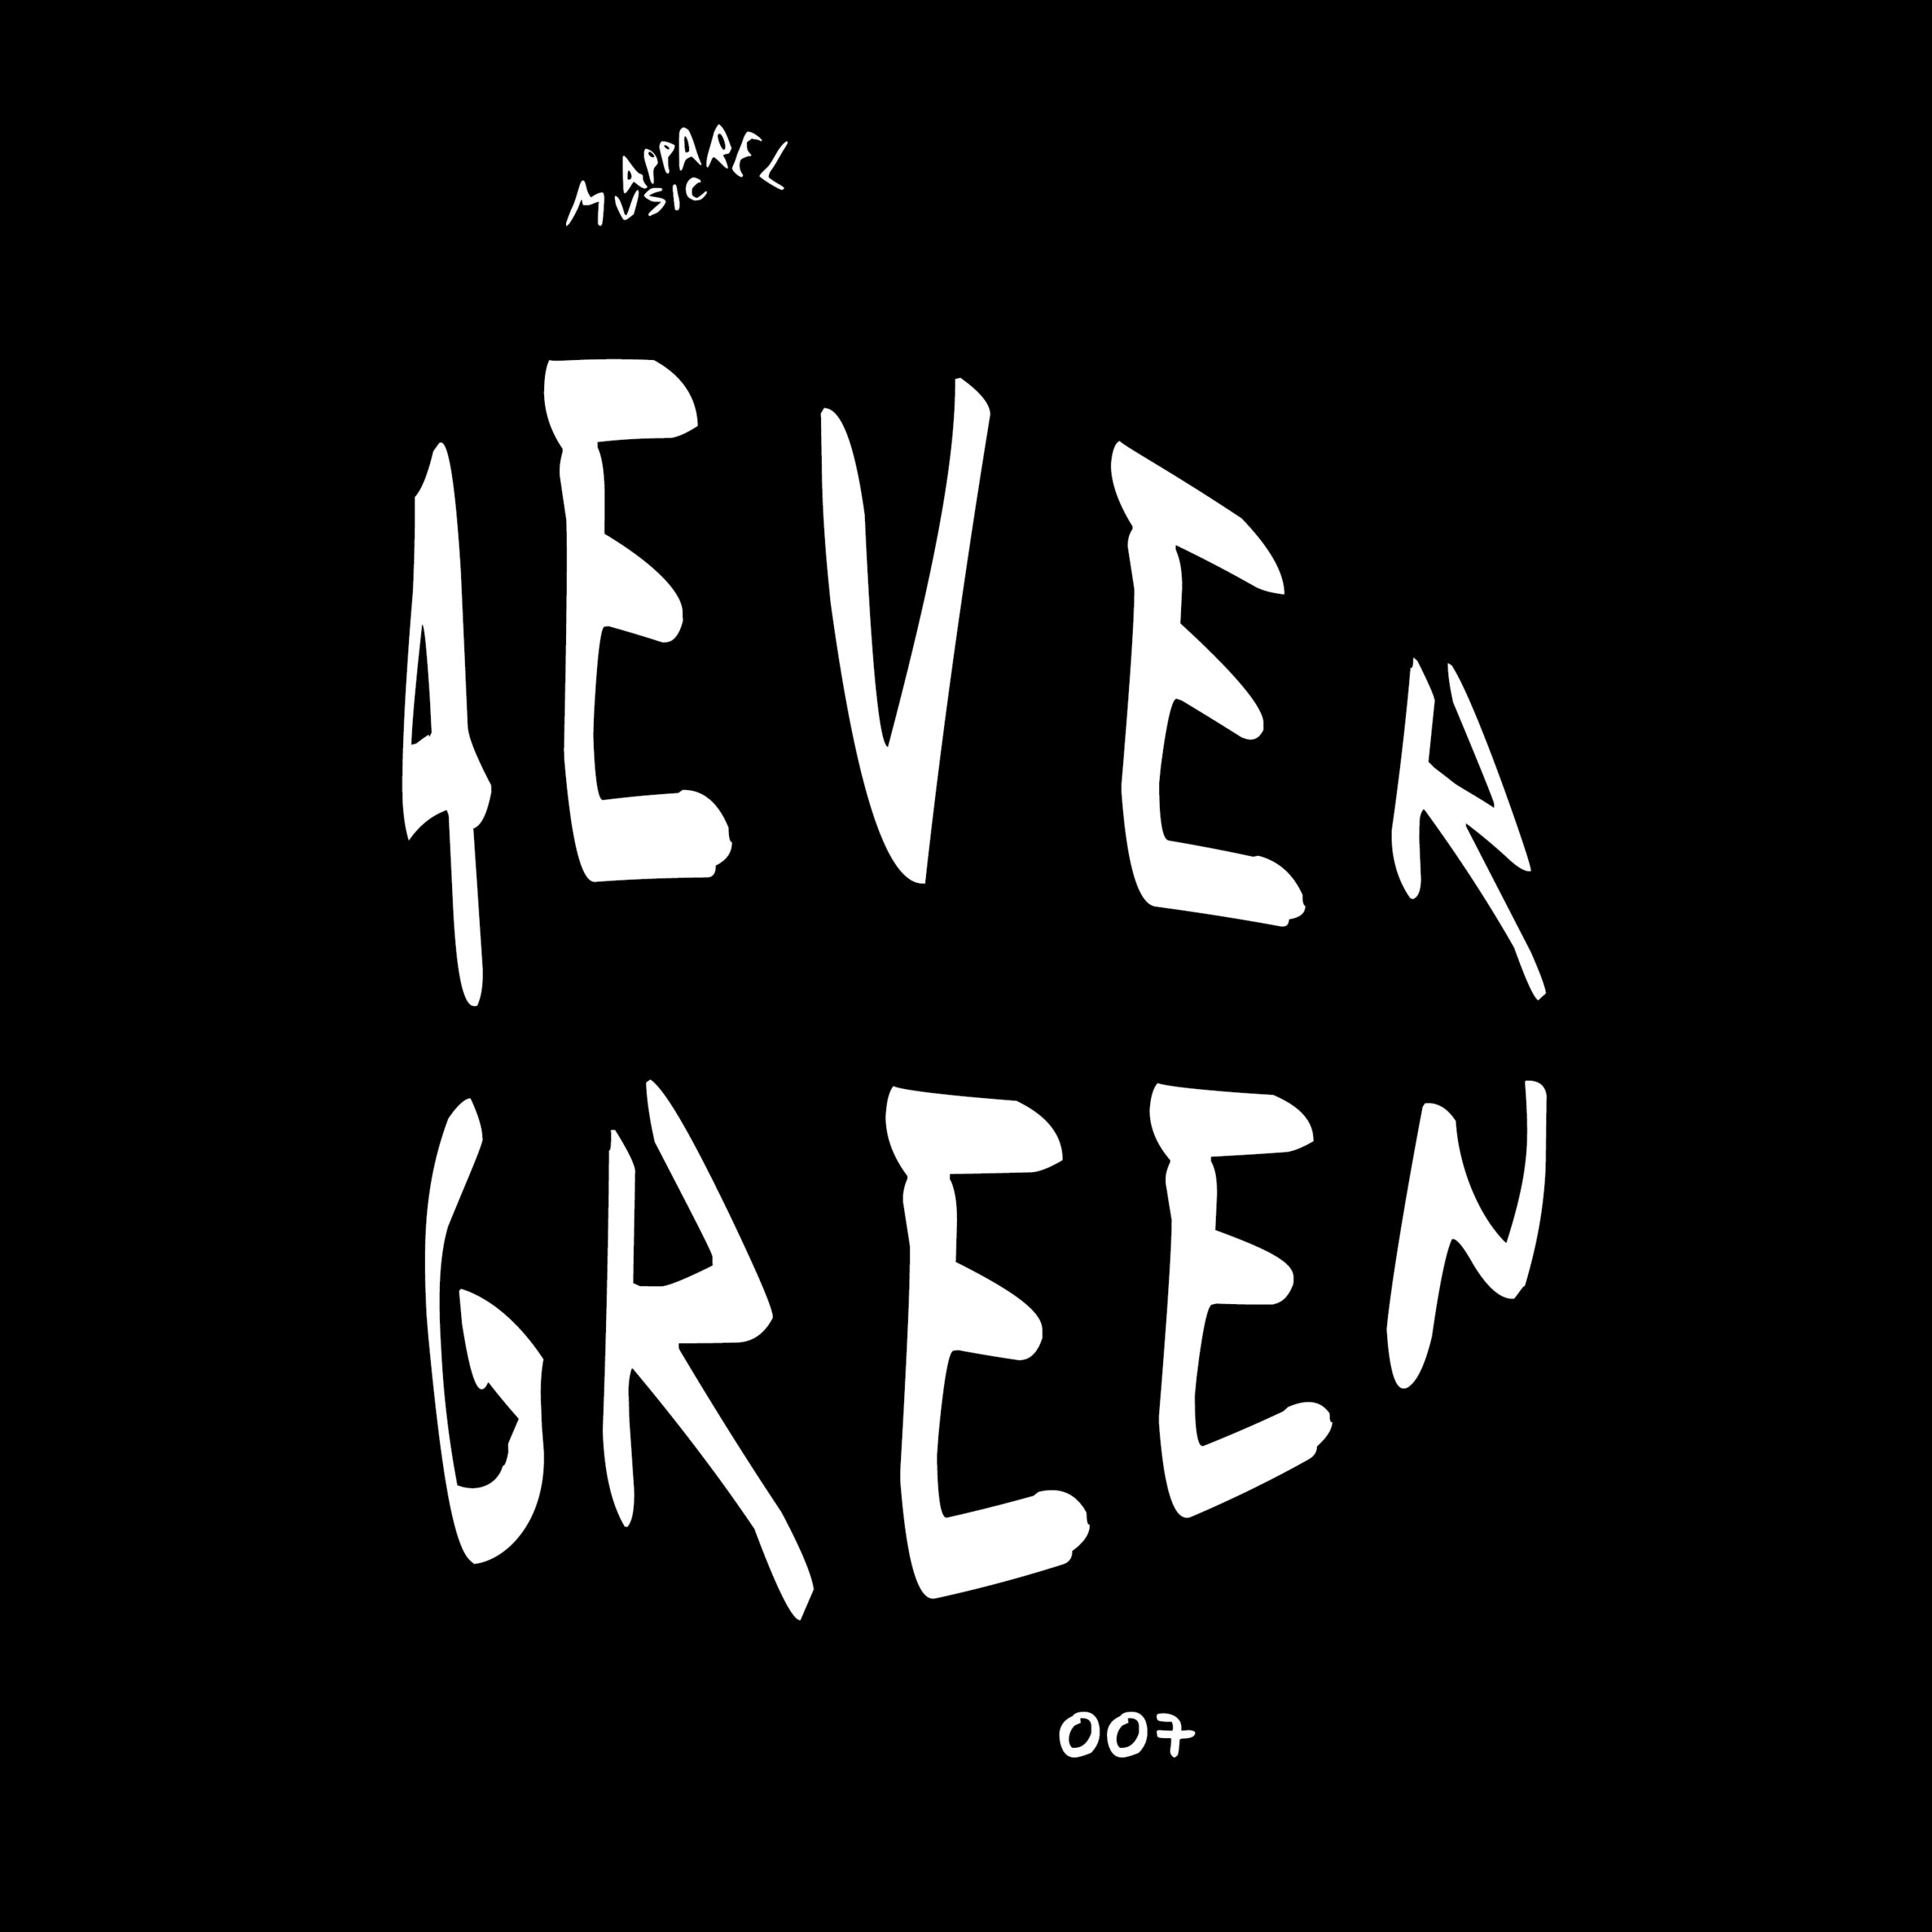 Out now ‘4evergreen 007’ by Various Artists